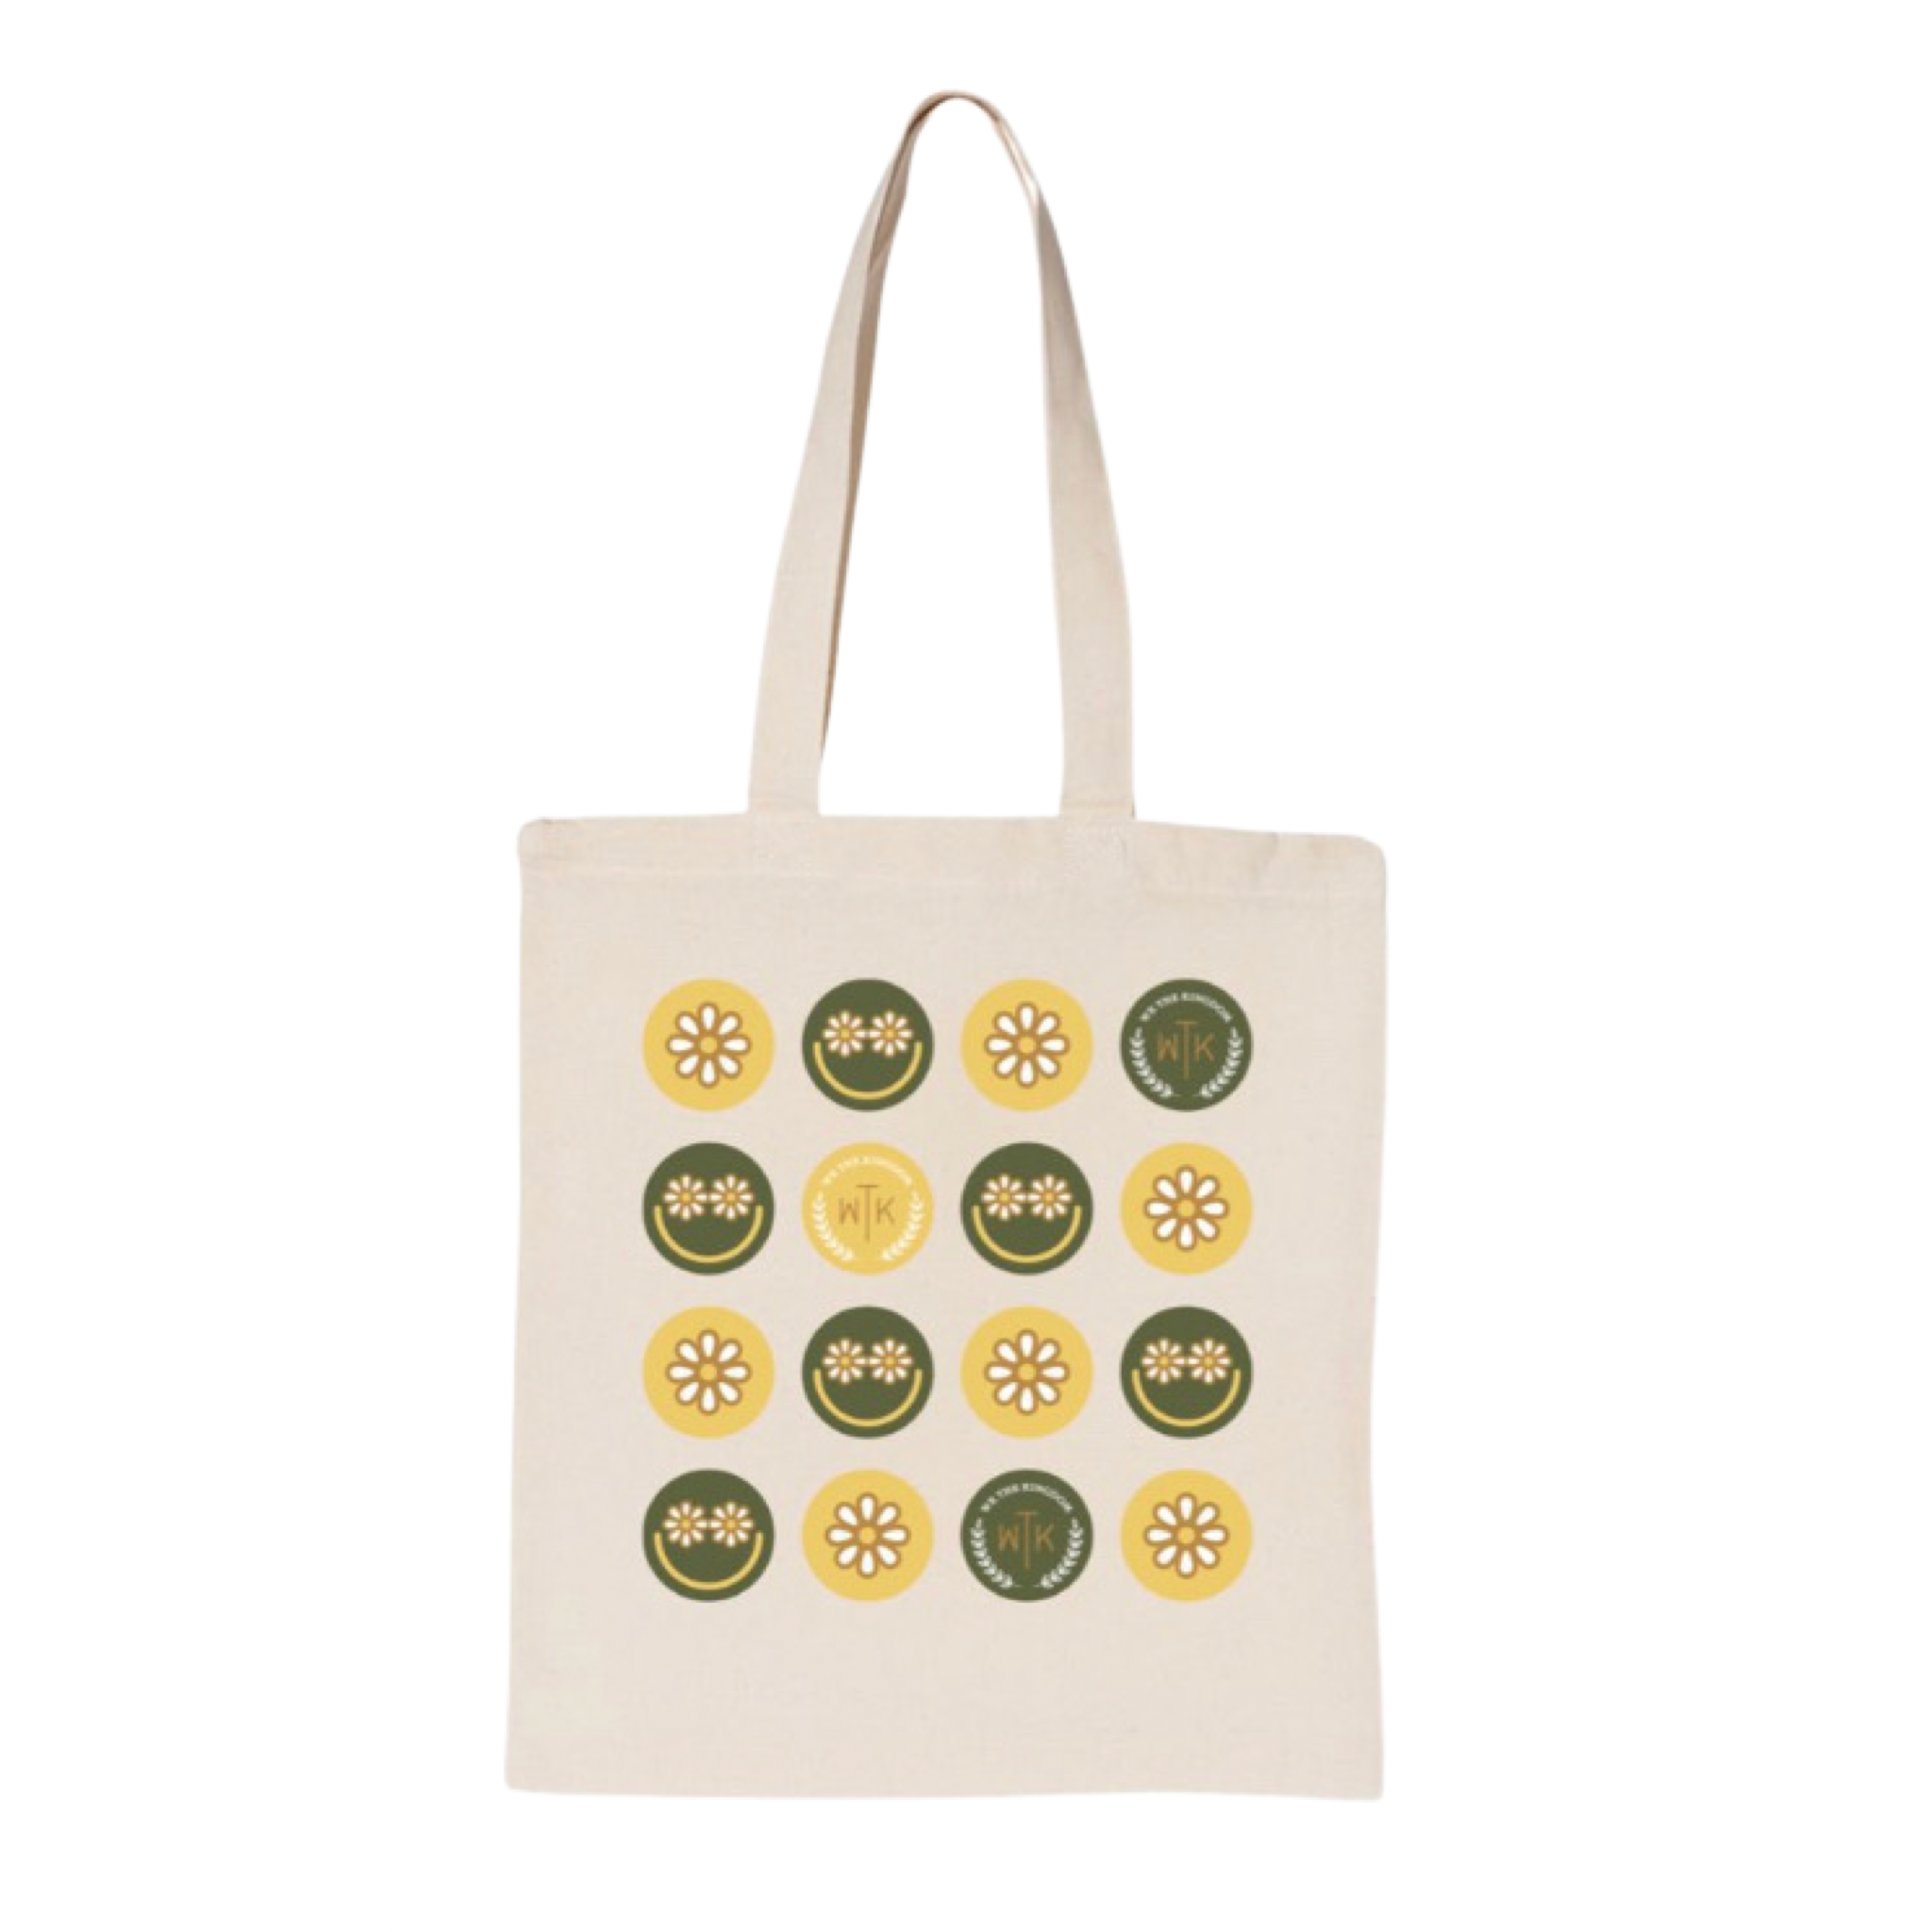 SMILEY TOTE